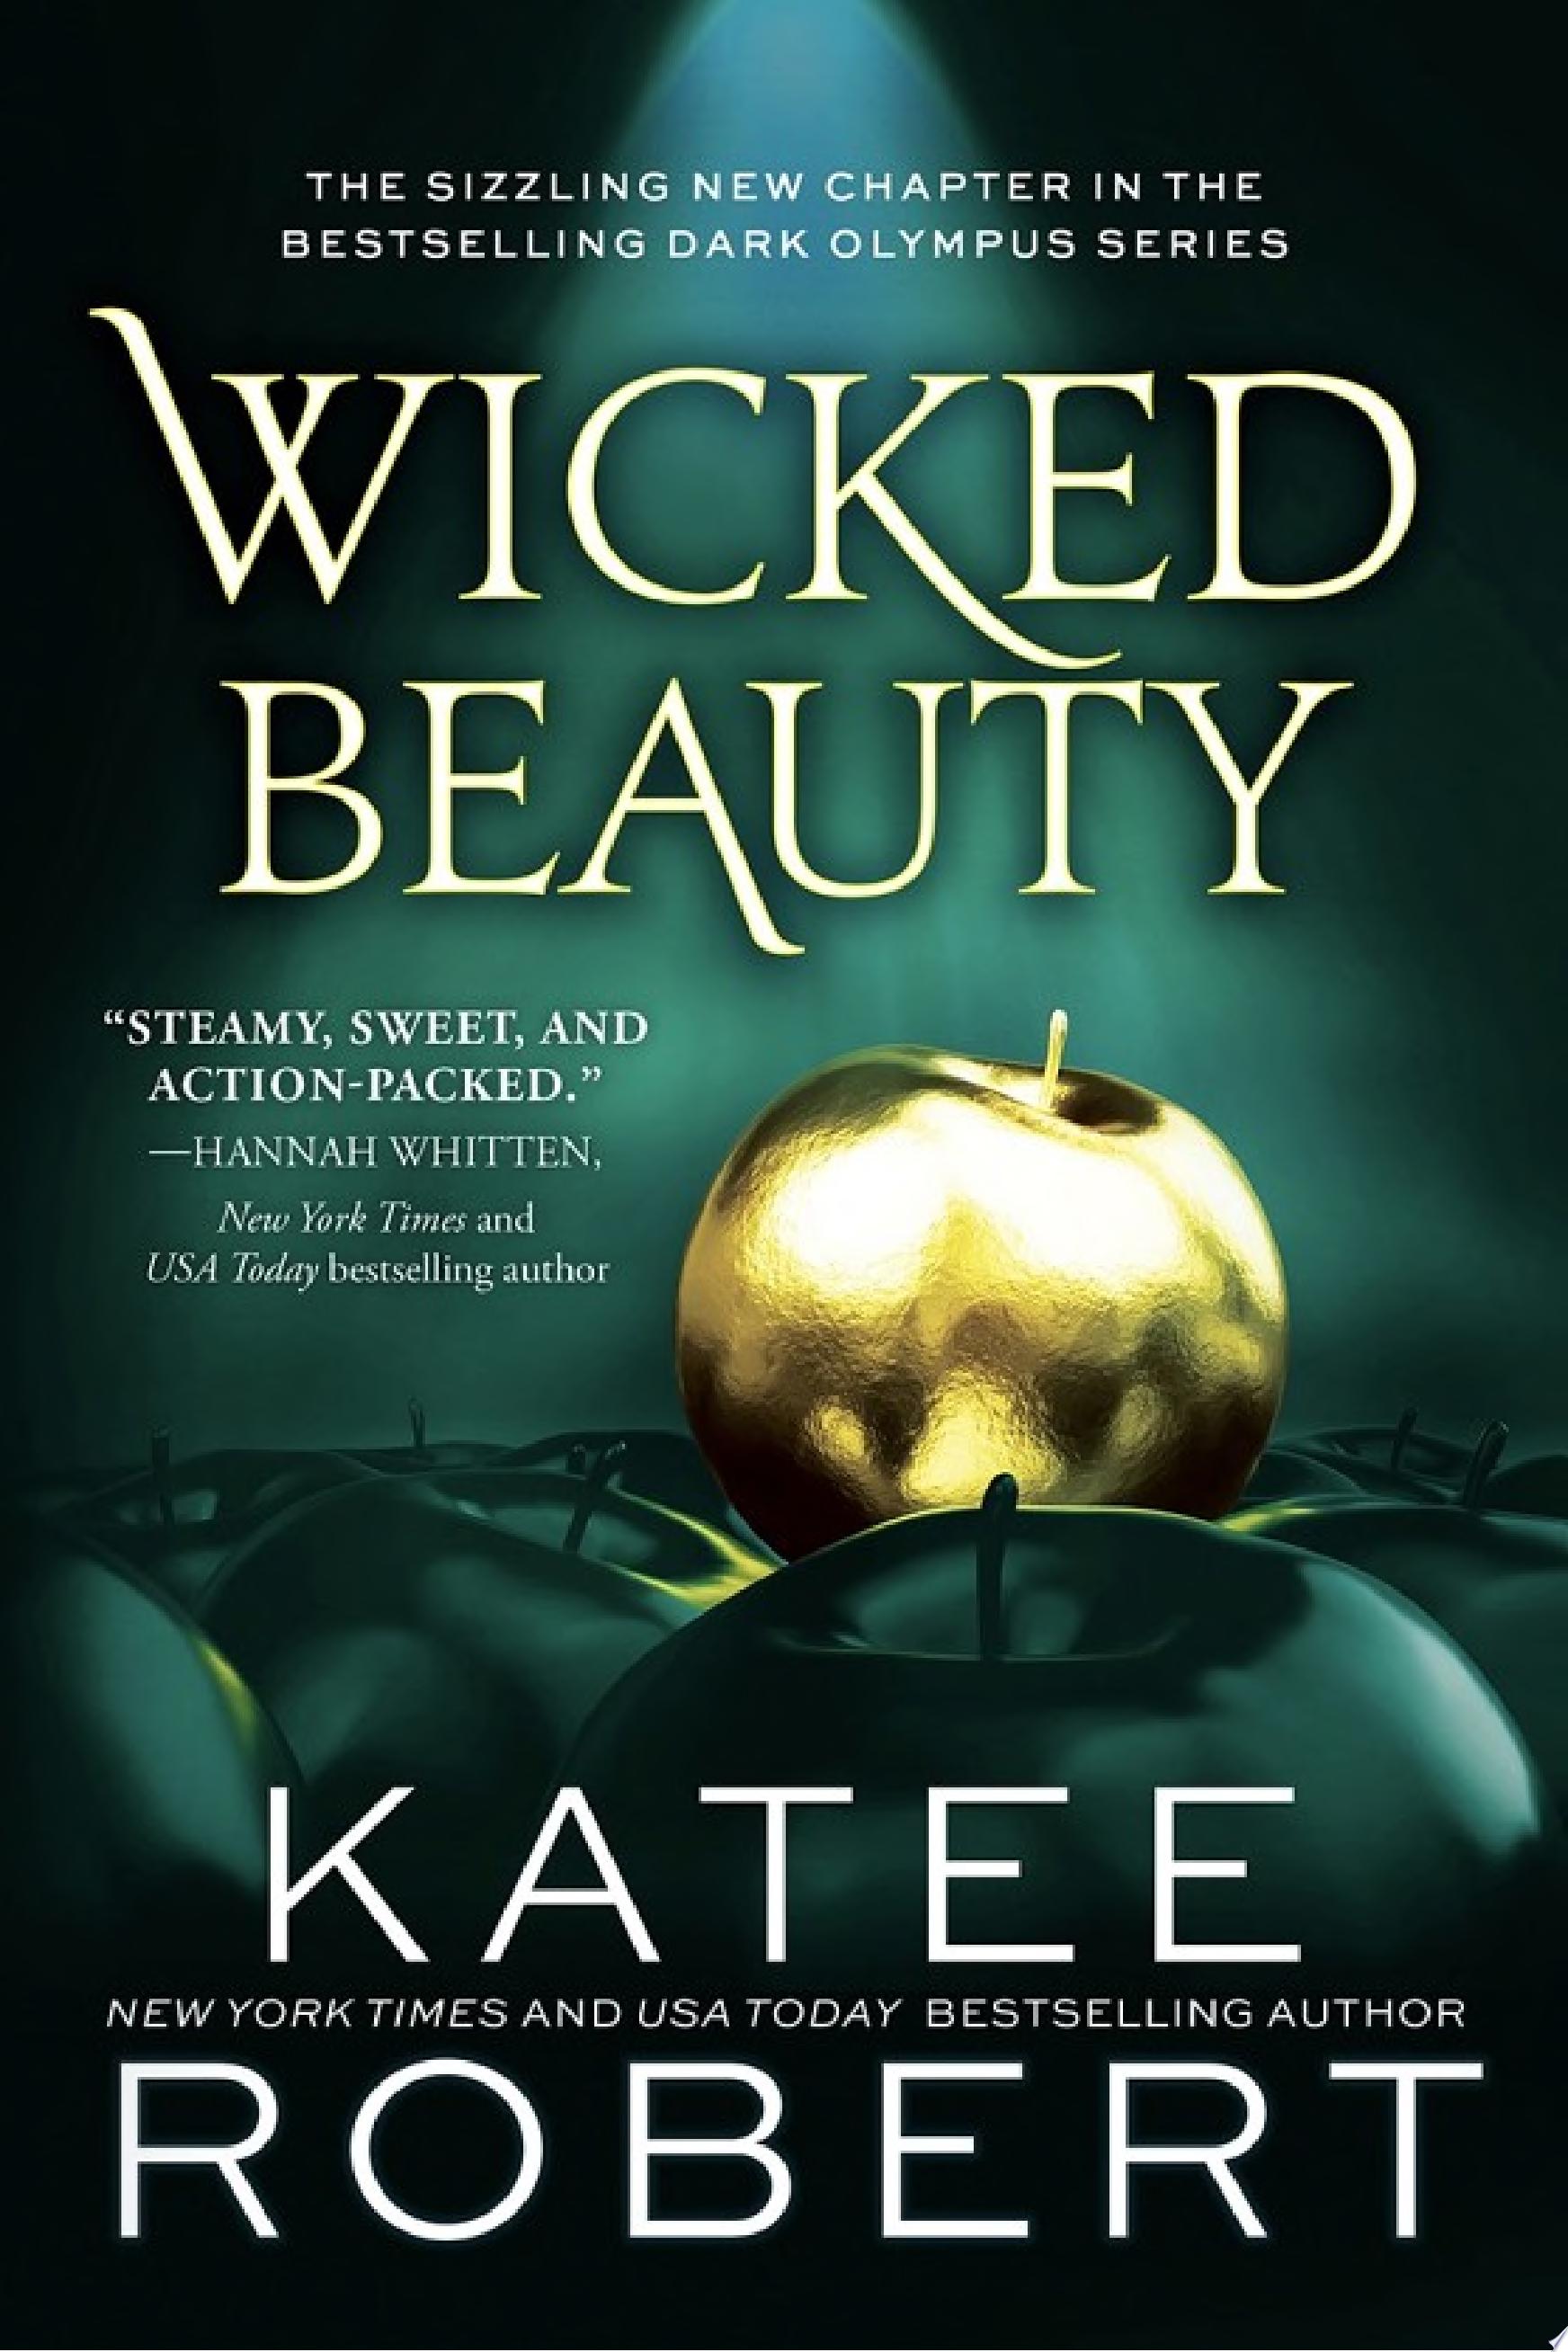 Image for "Wicked Beauty"